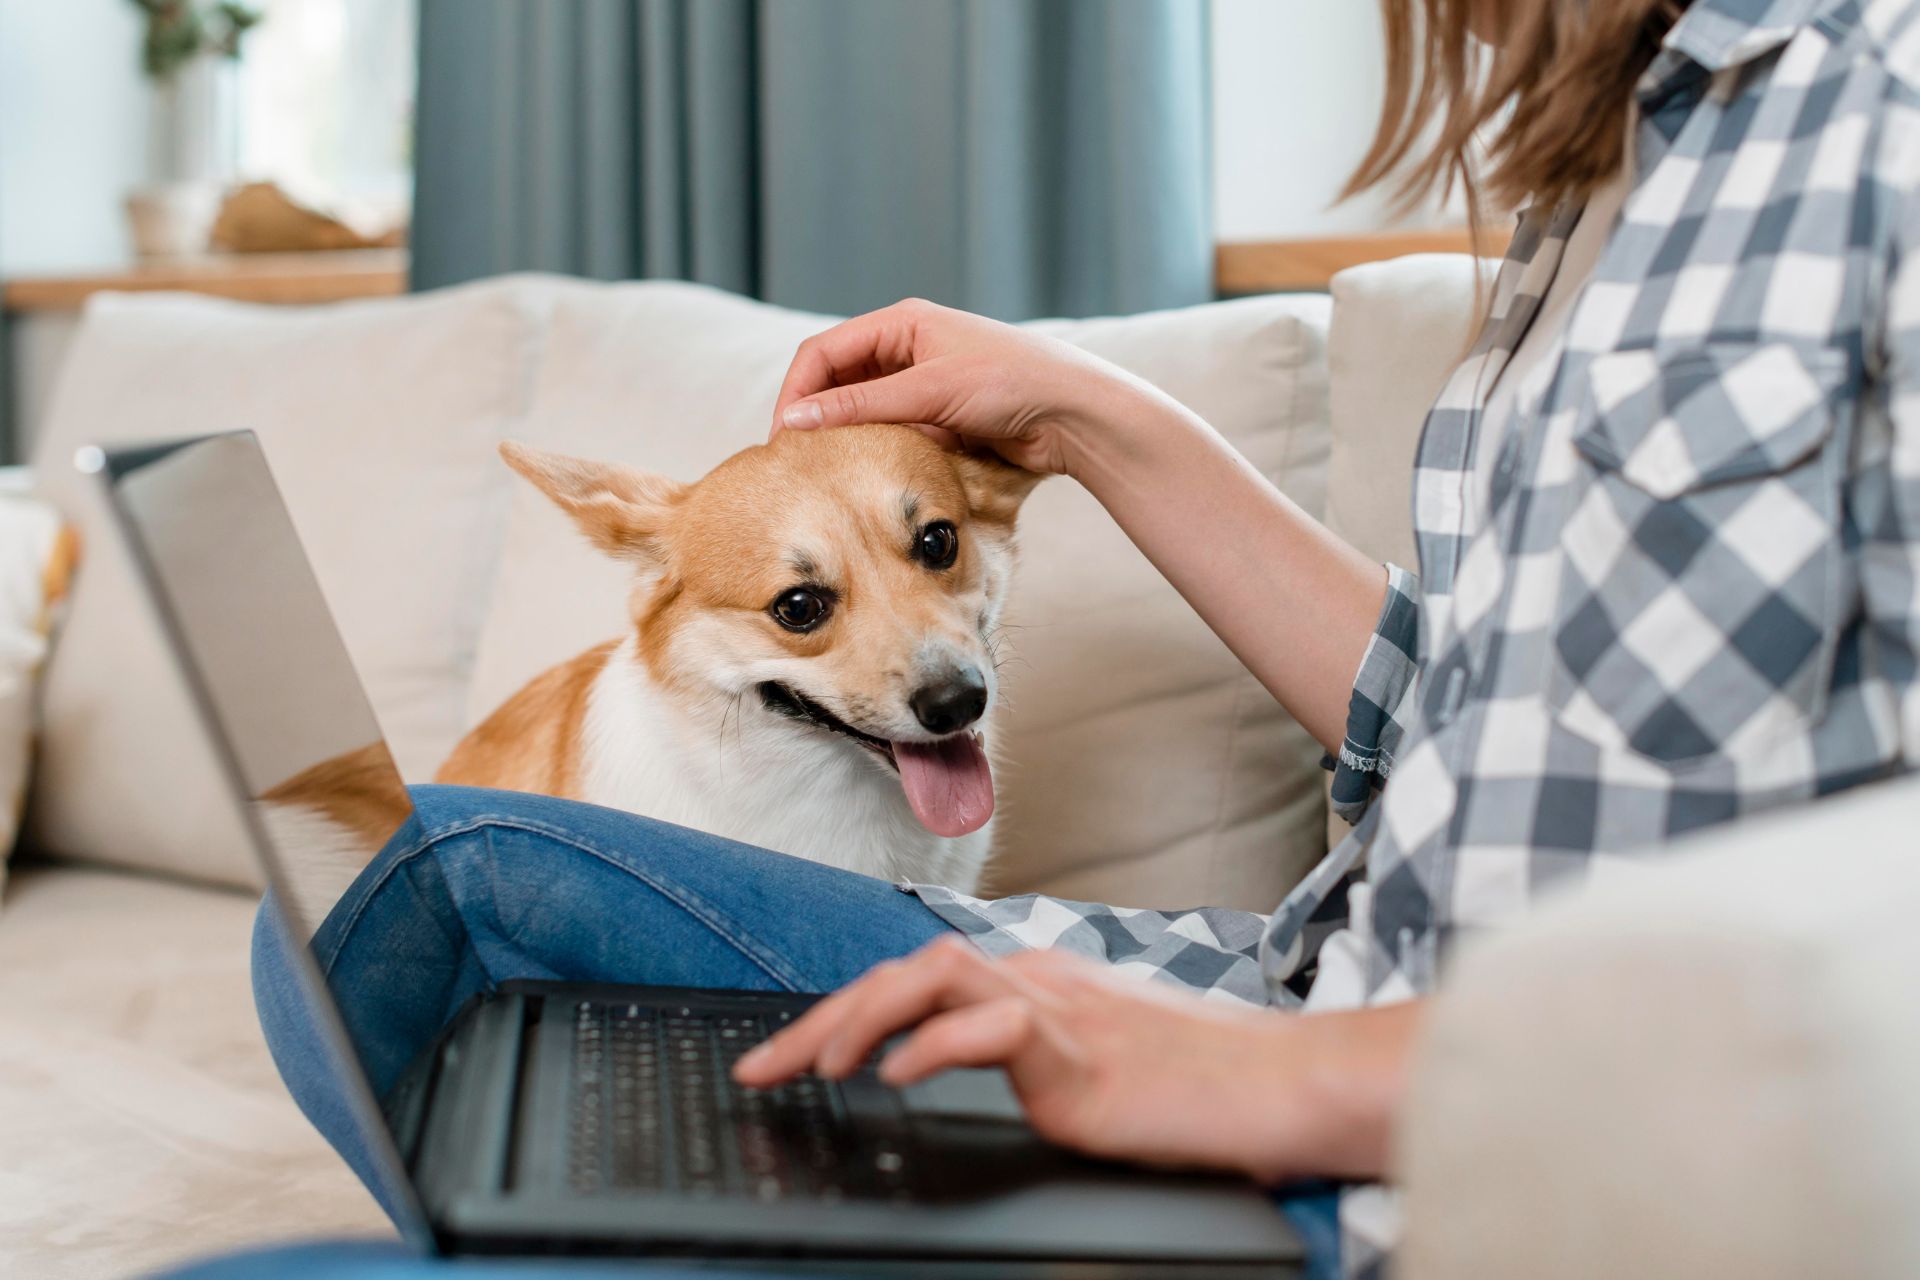 woman with dog on couch working on laptop